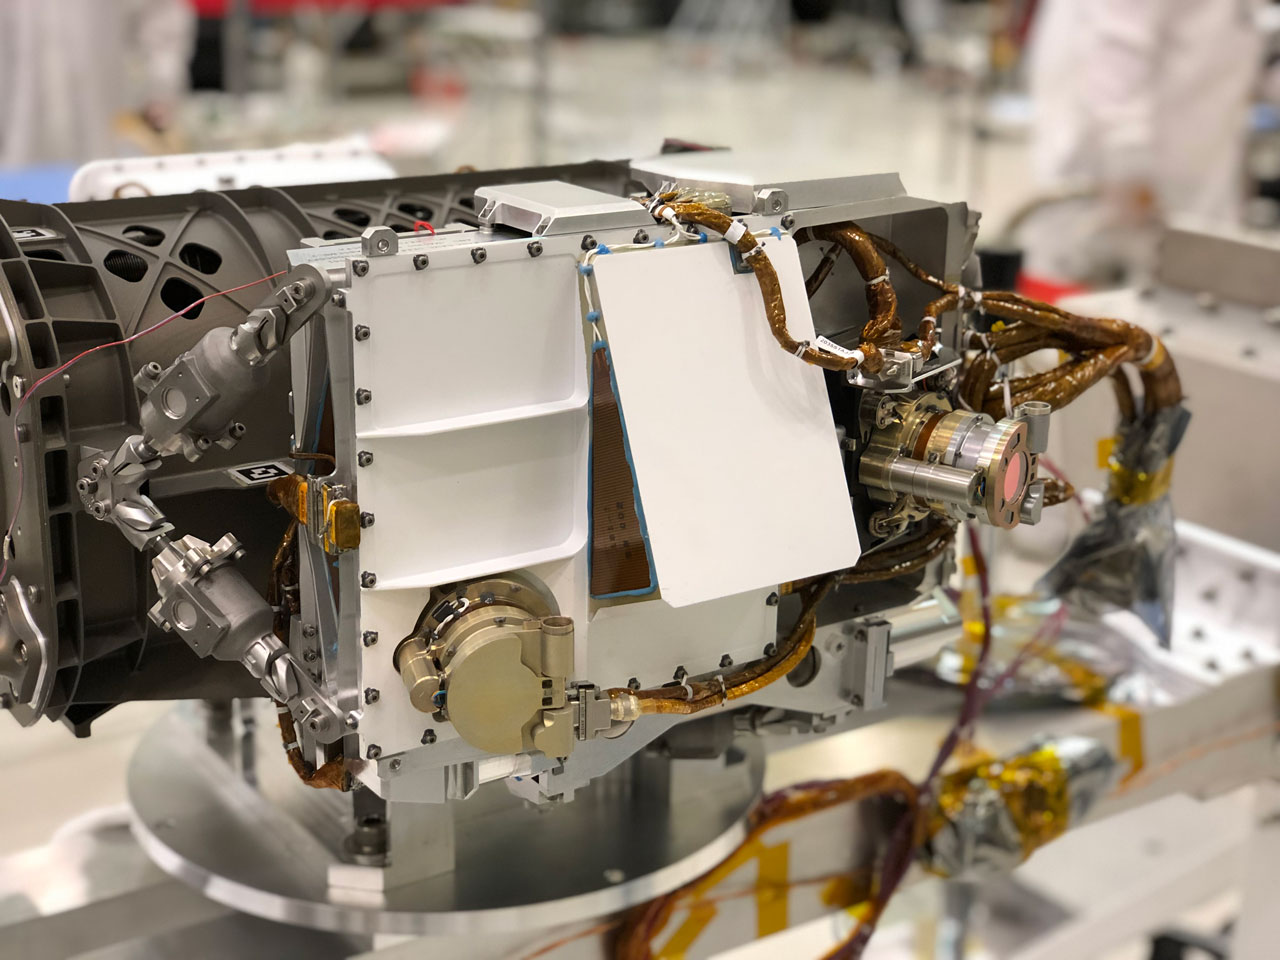 The SHERLOC instrument is located at the end of the robotic arm on NASA's Mars 2020 rover.